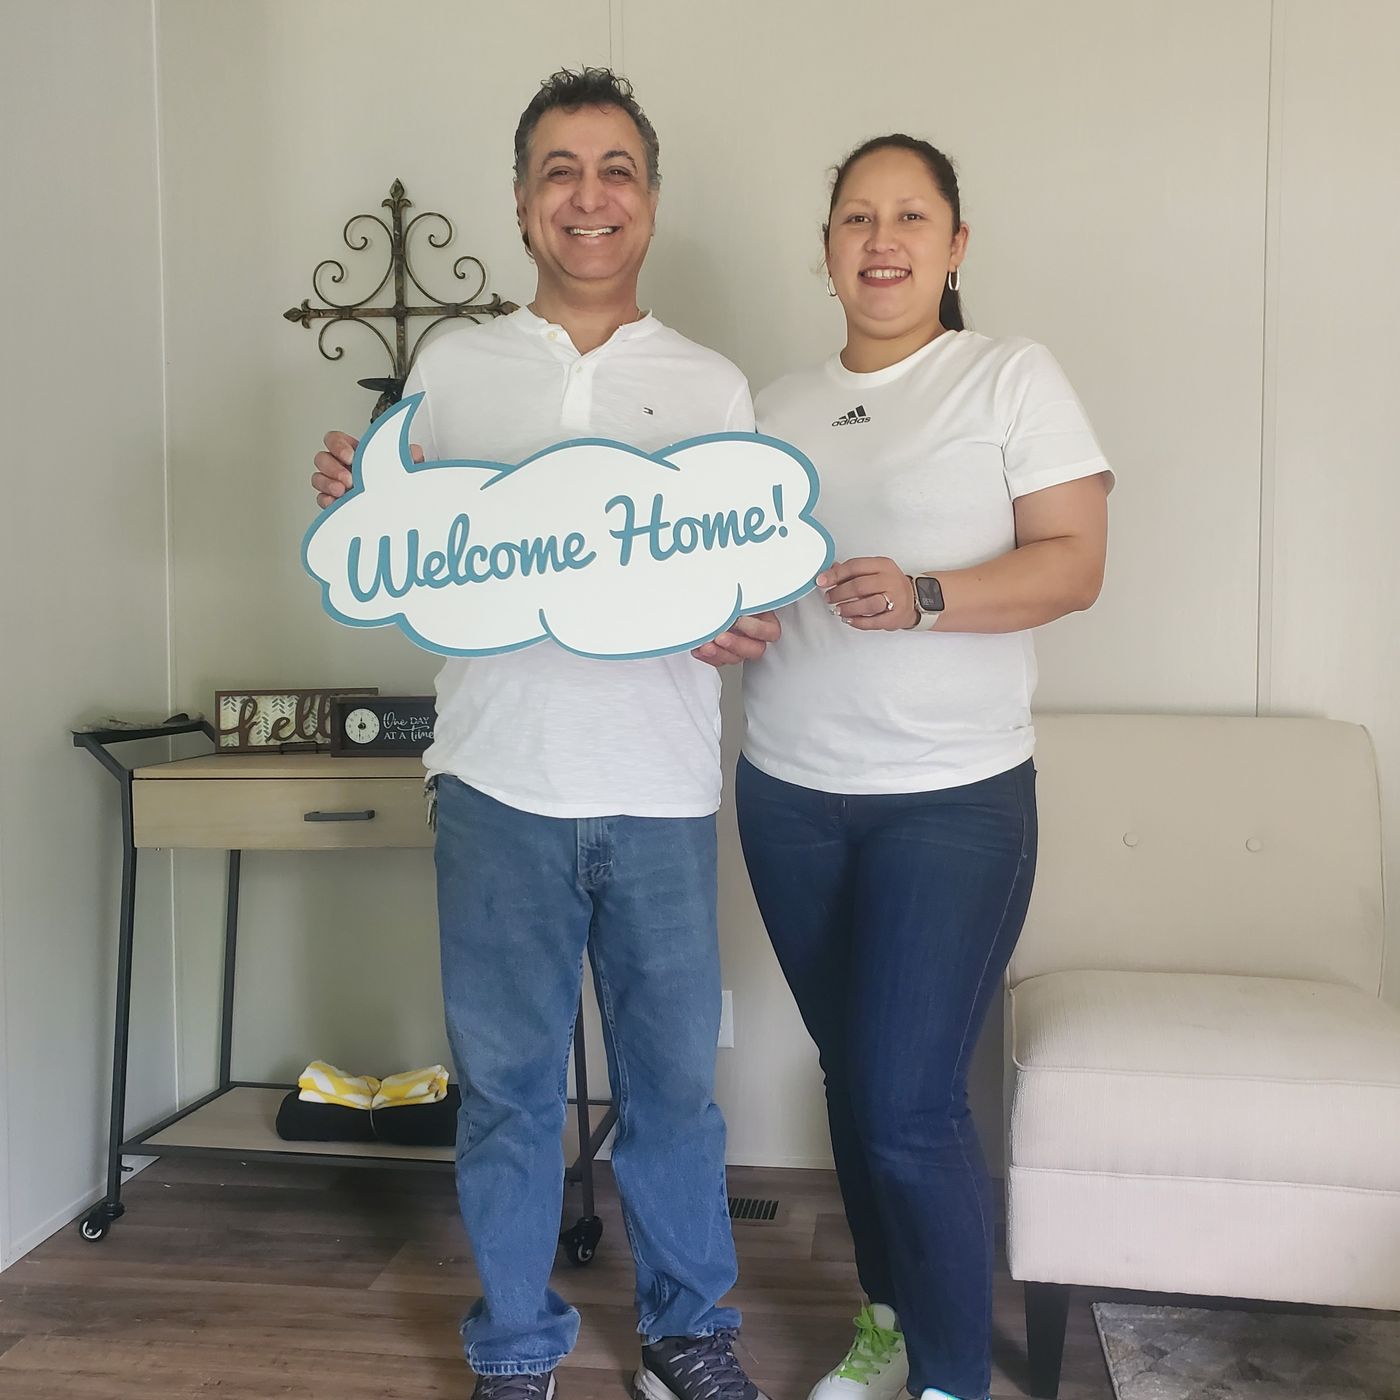 GUSTAVO R. welcome home image